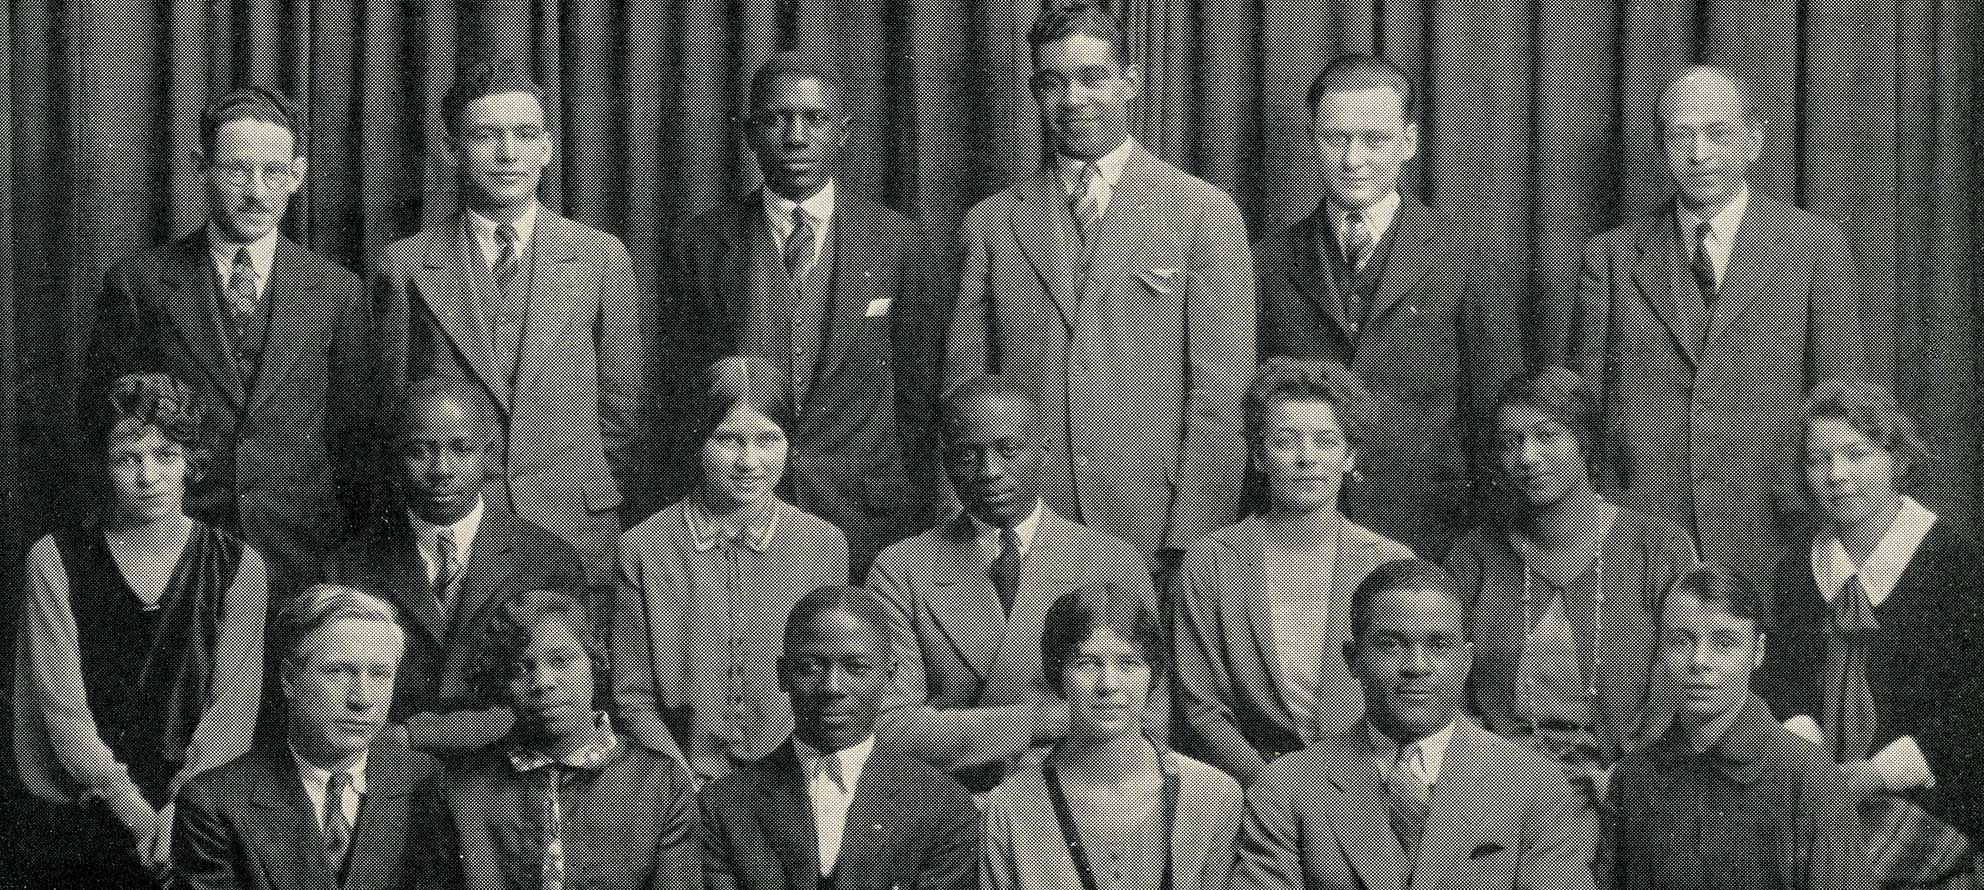 Members of the Negro-Caucasian Club pose for a group photograph.